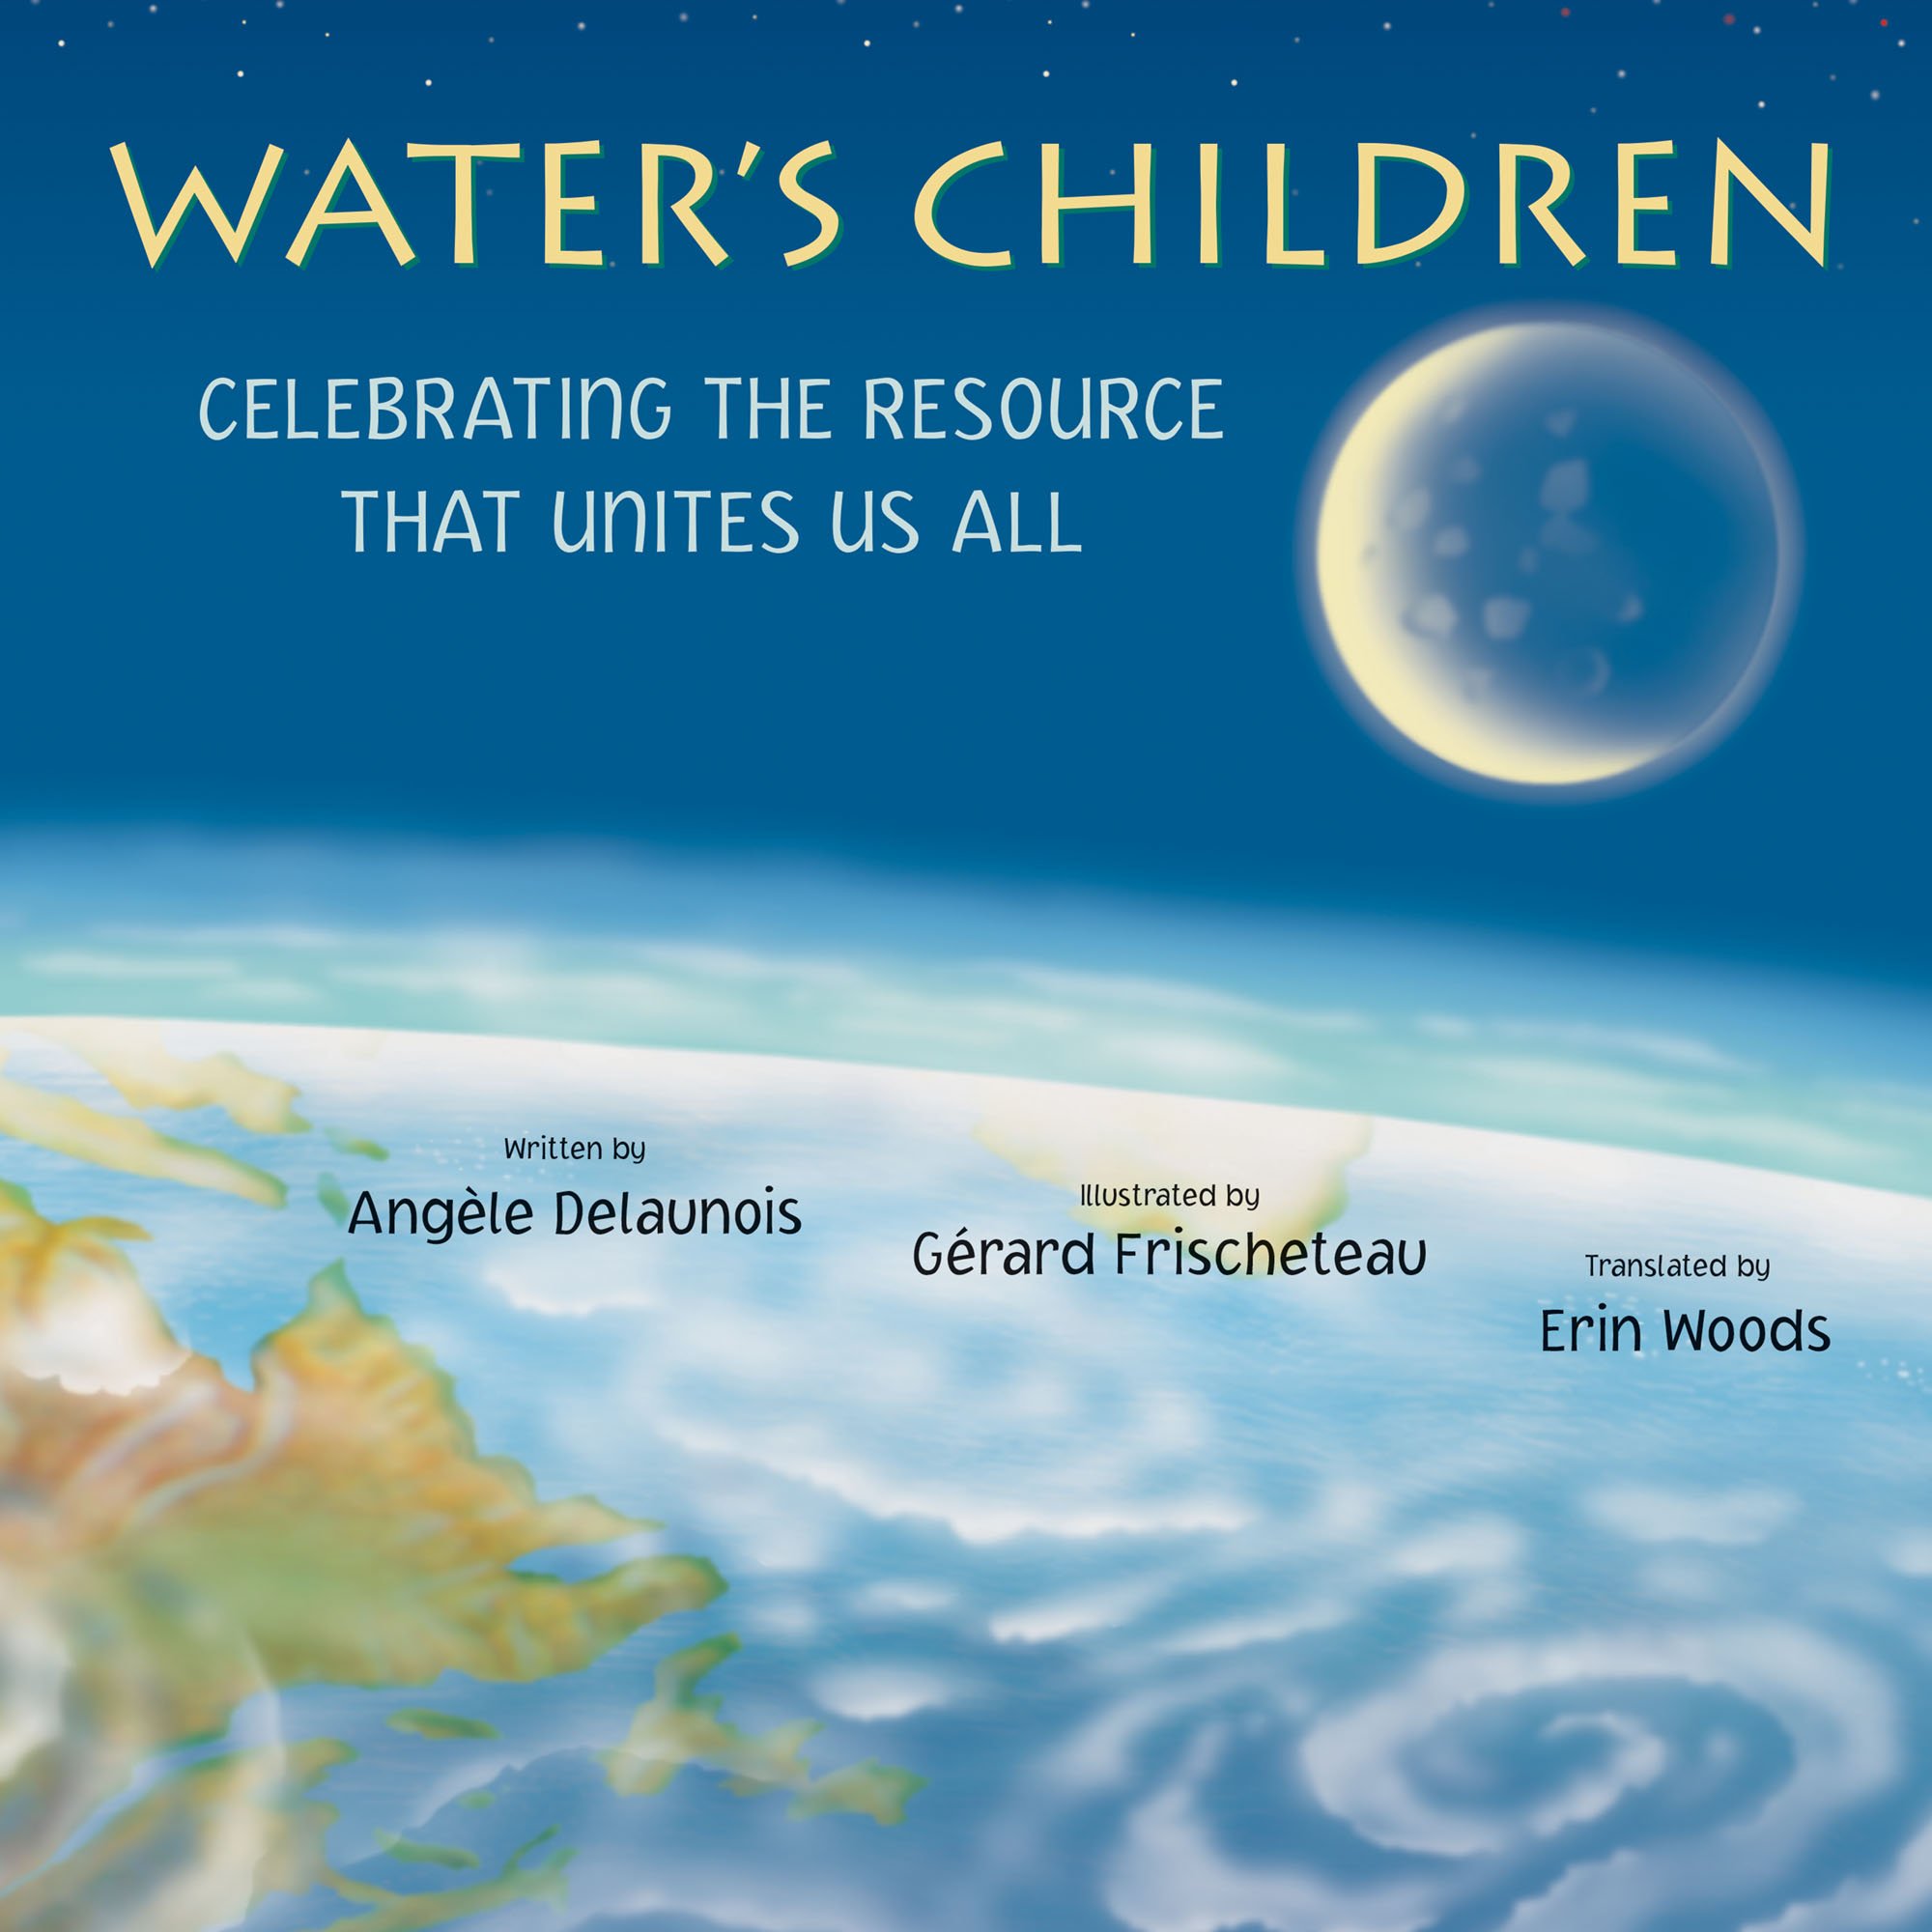 Water’s Children: Celebrating the Resource That Unites Us All By Angele DeLaunois Illustrated by Gerard Frischeteau ISBN : 978-1772780154 Pajama Press 32 pages Grades K–2